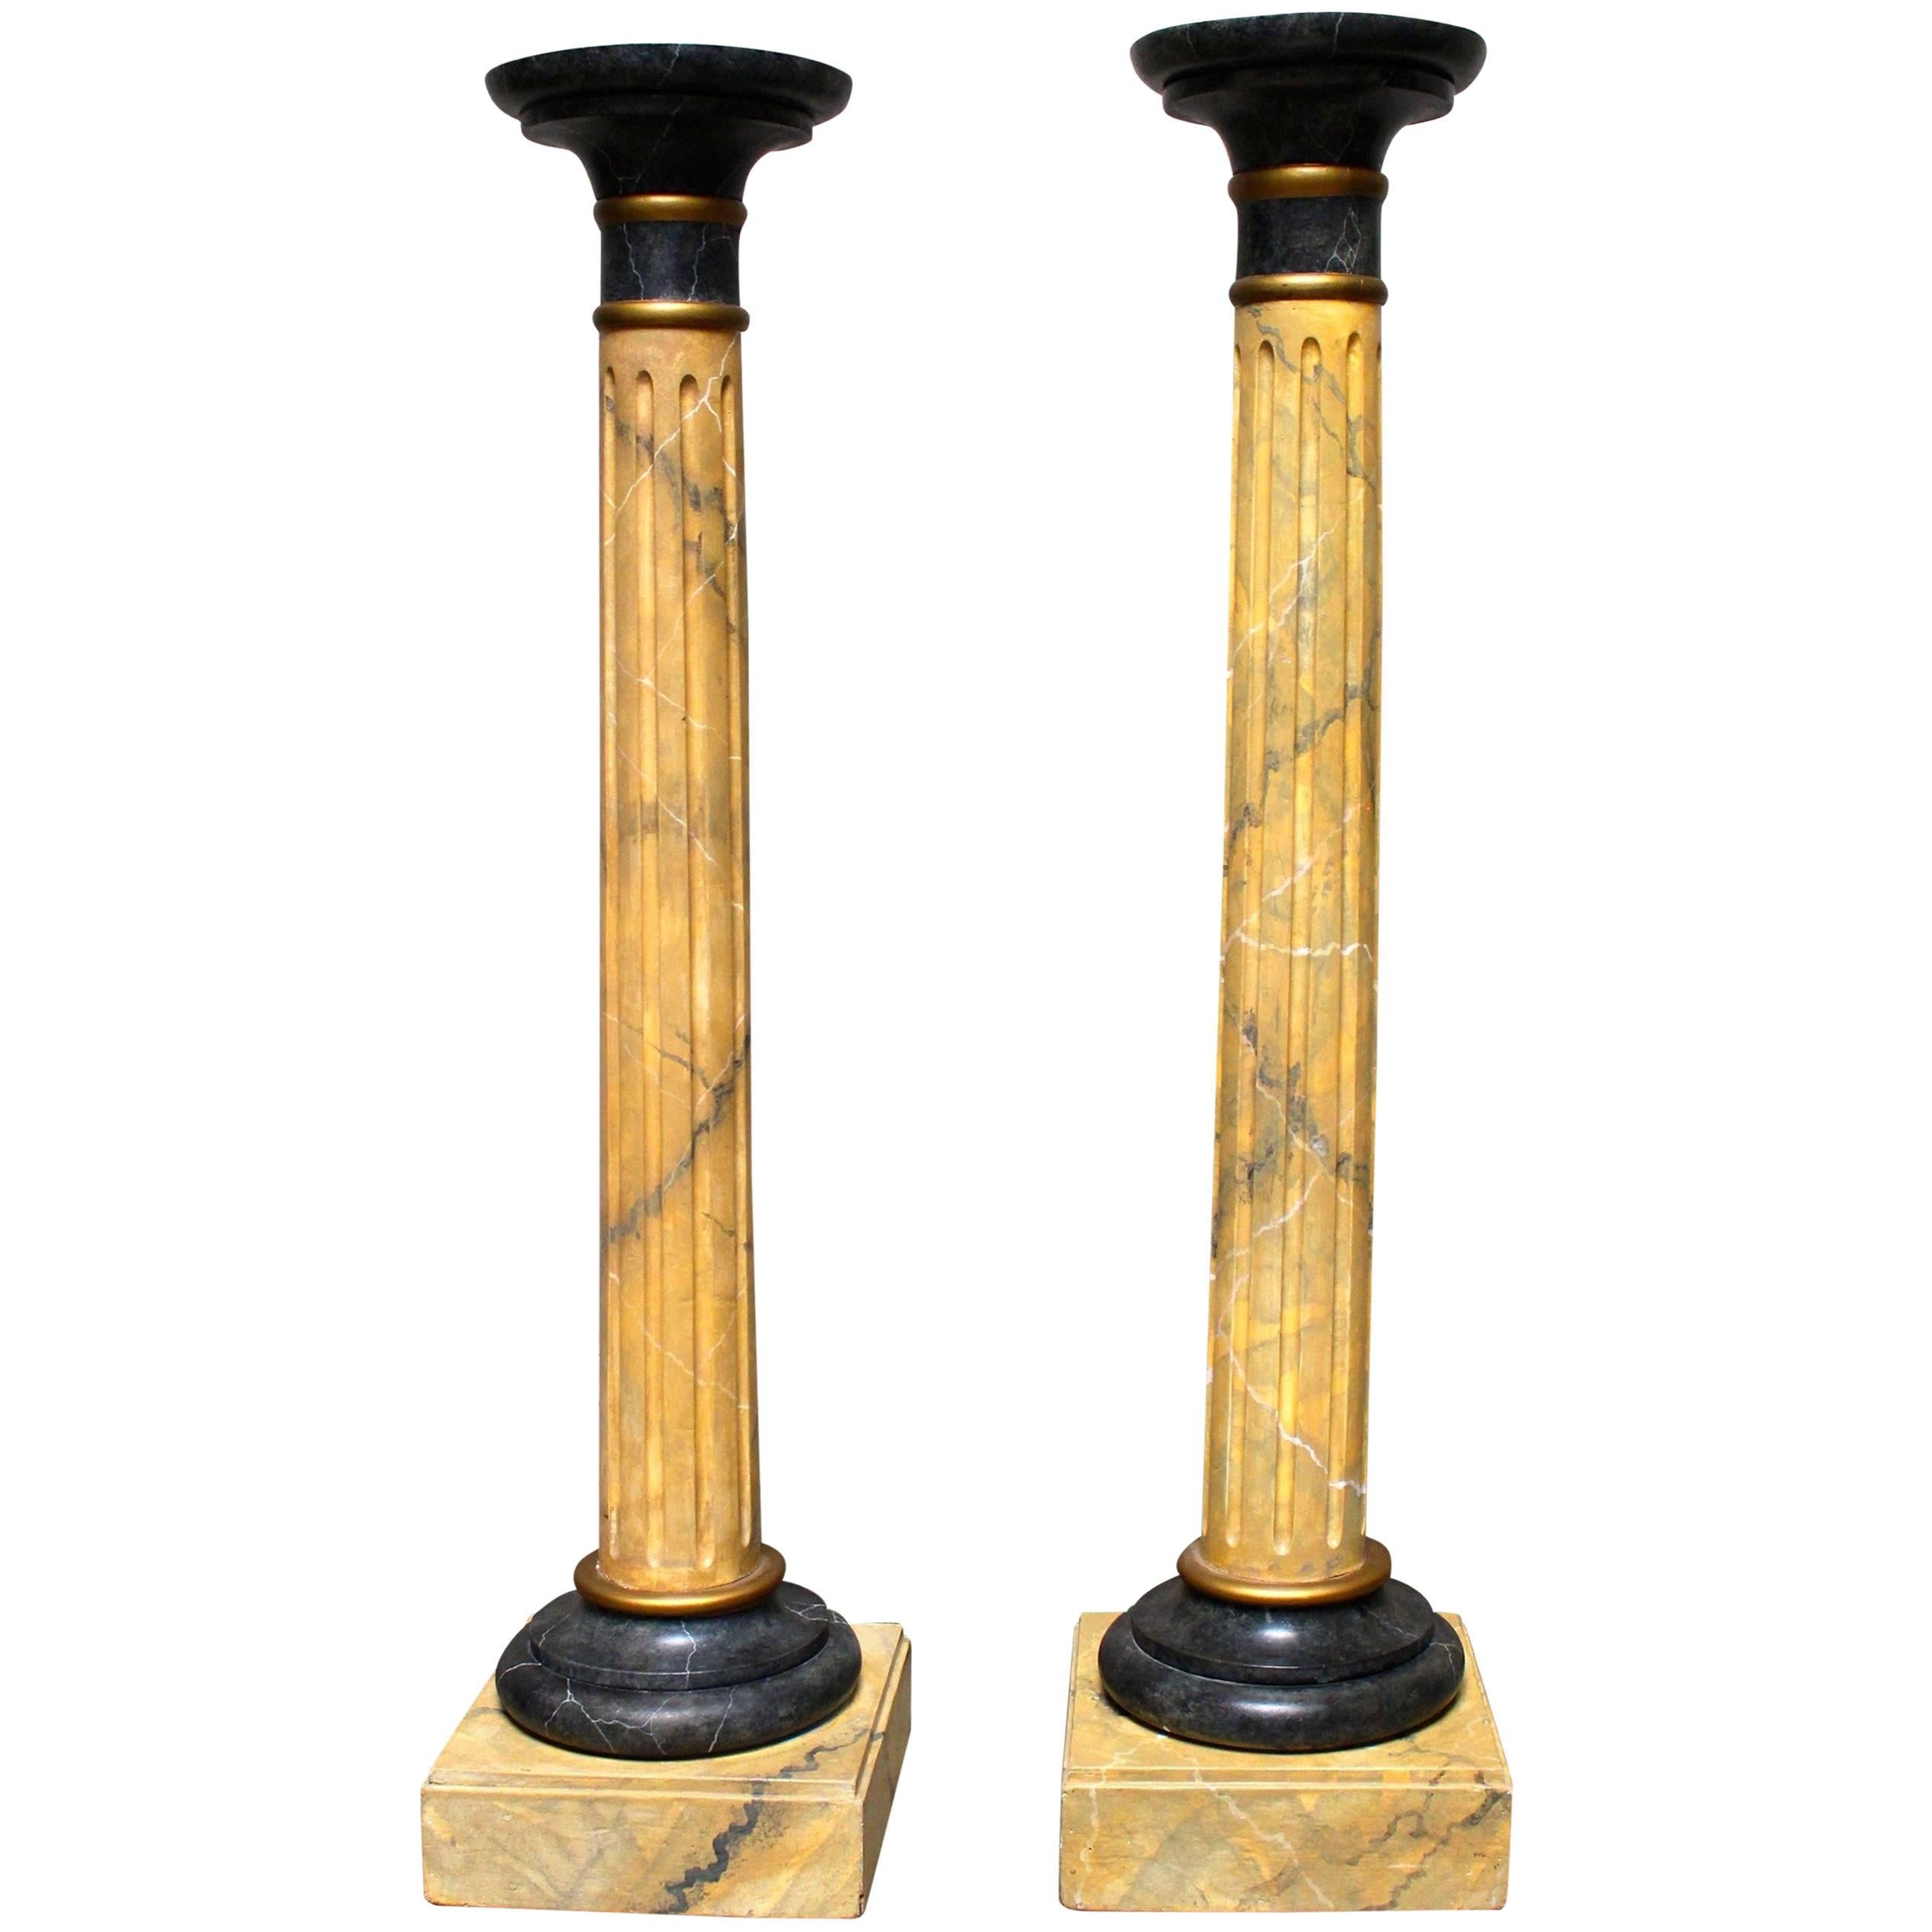 Pair of Wood Columns with Faux Marble Painted Finish